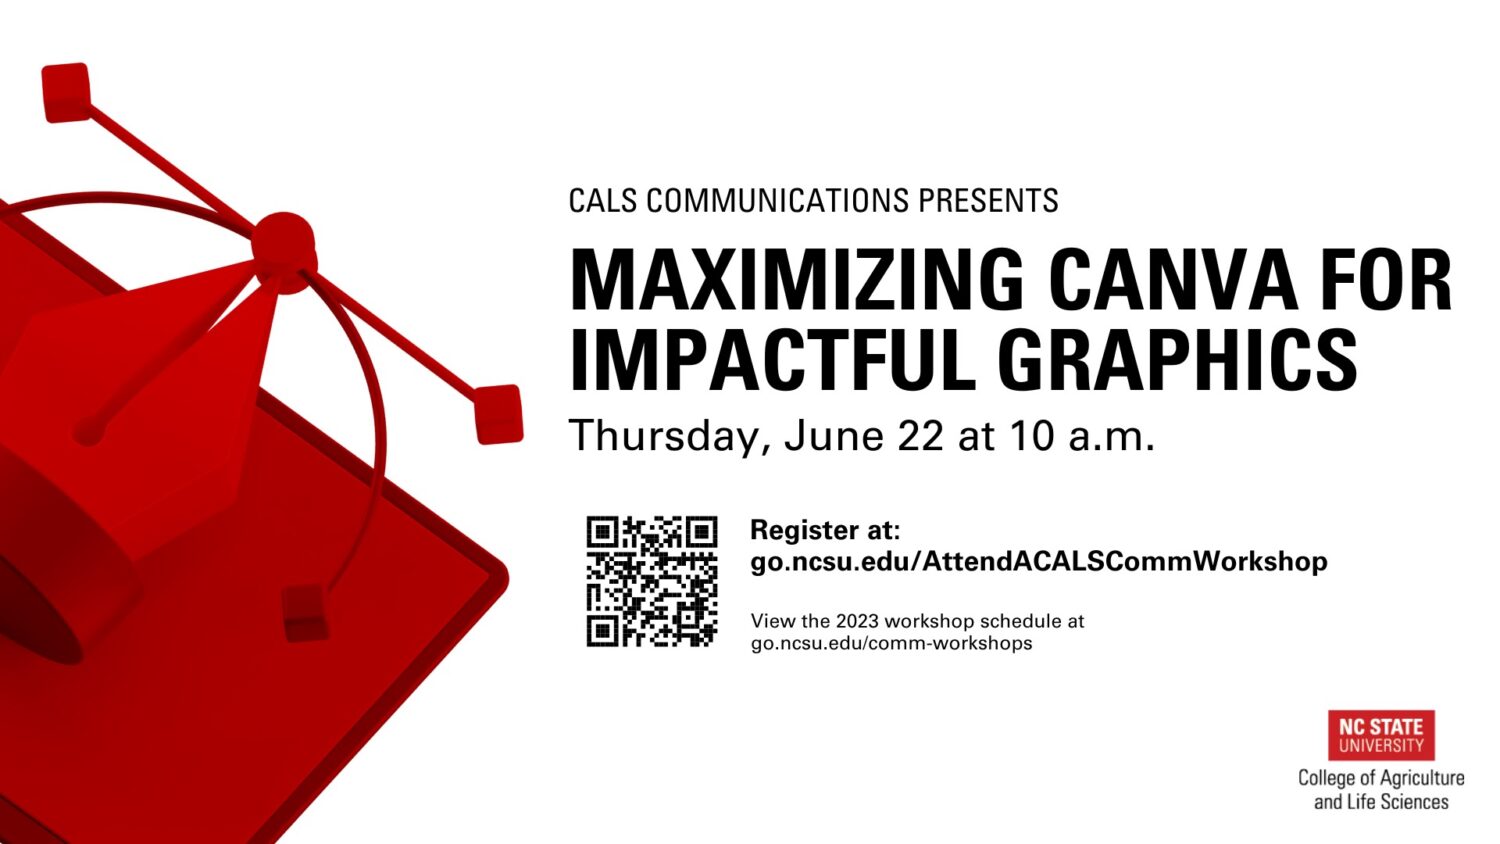 Flyer for the June CALS Comm Workshop Maximizing Canva for Impactful Graphics